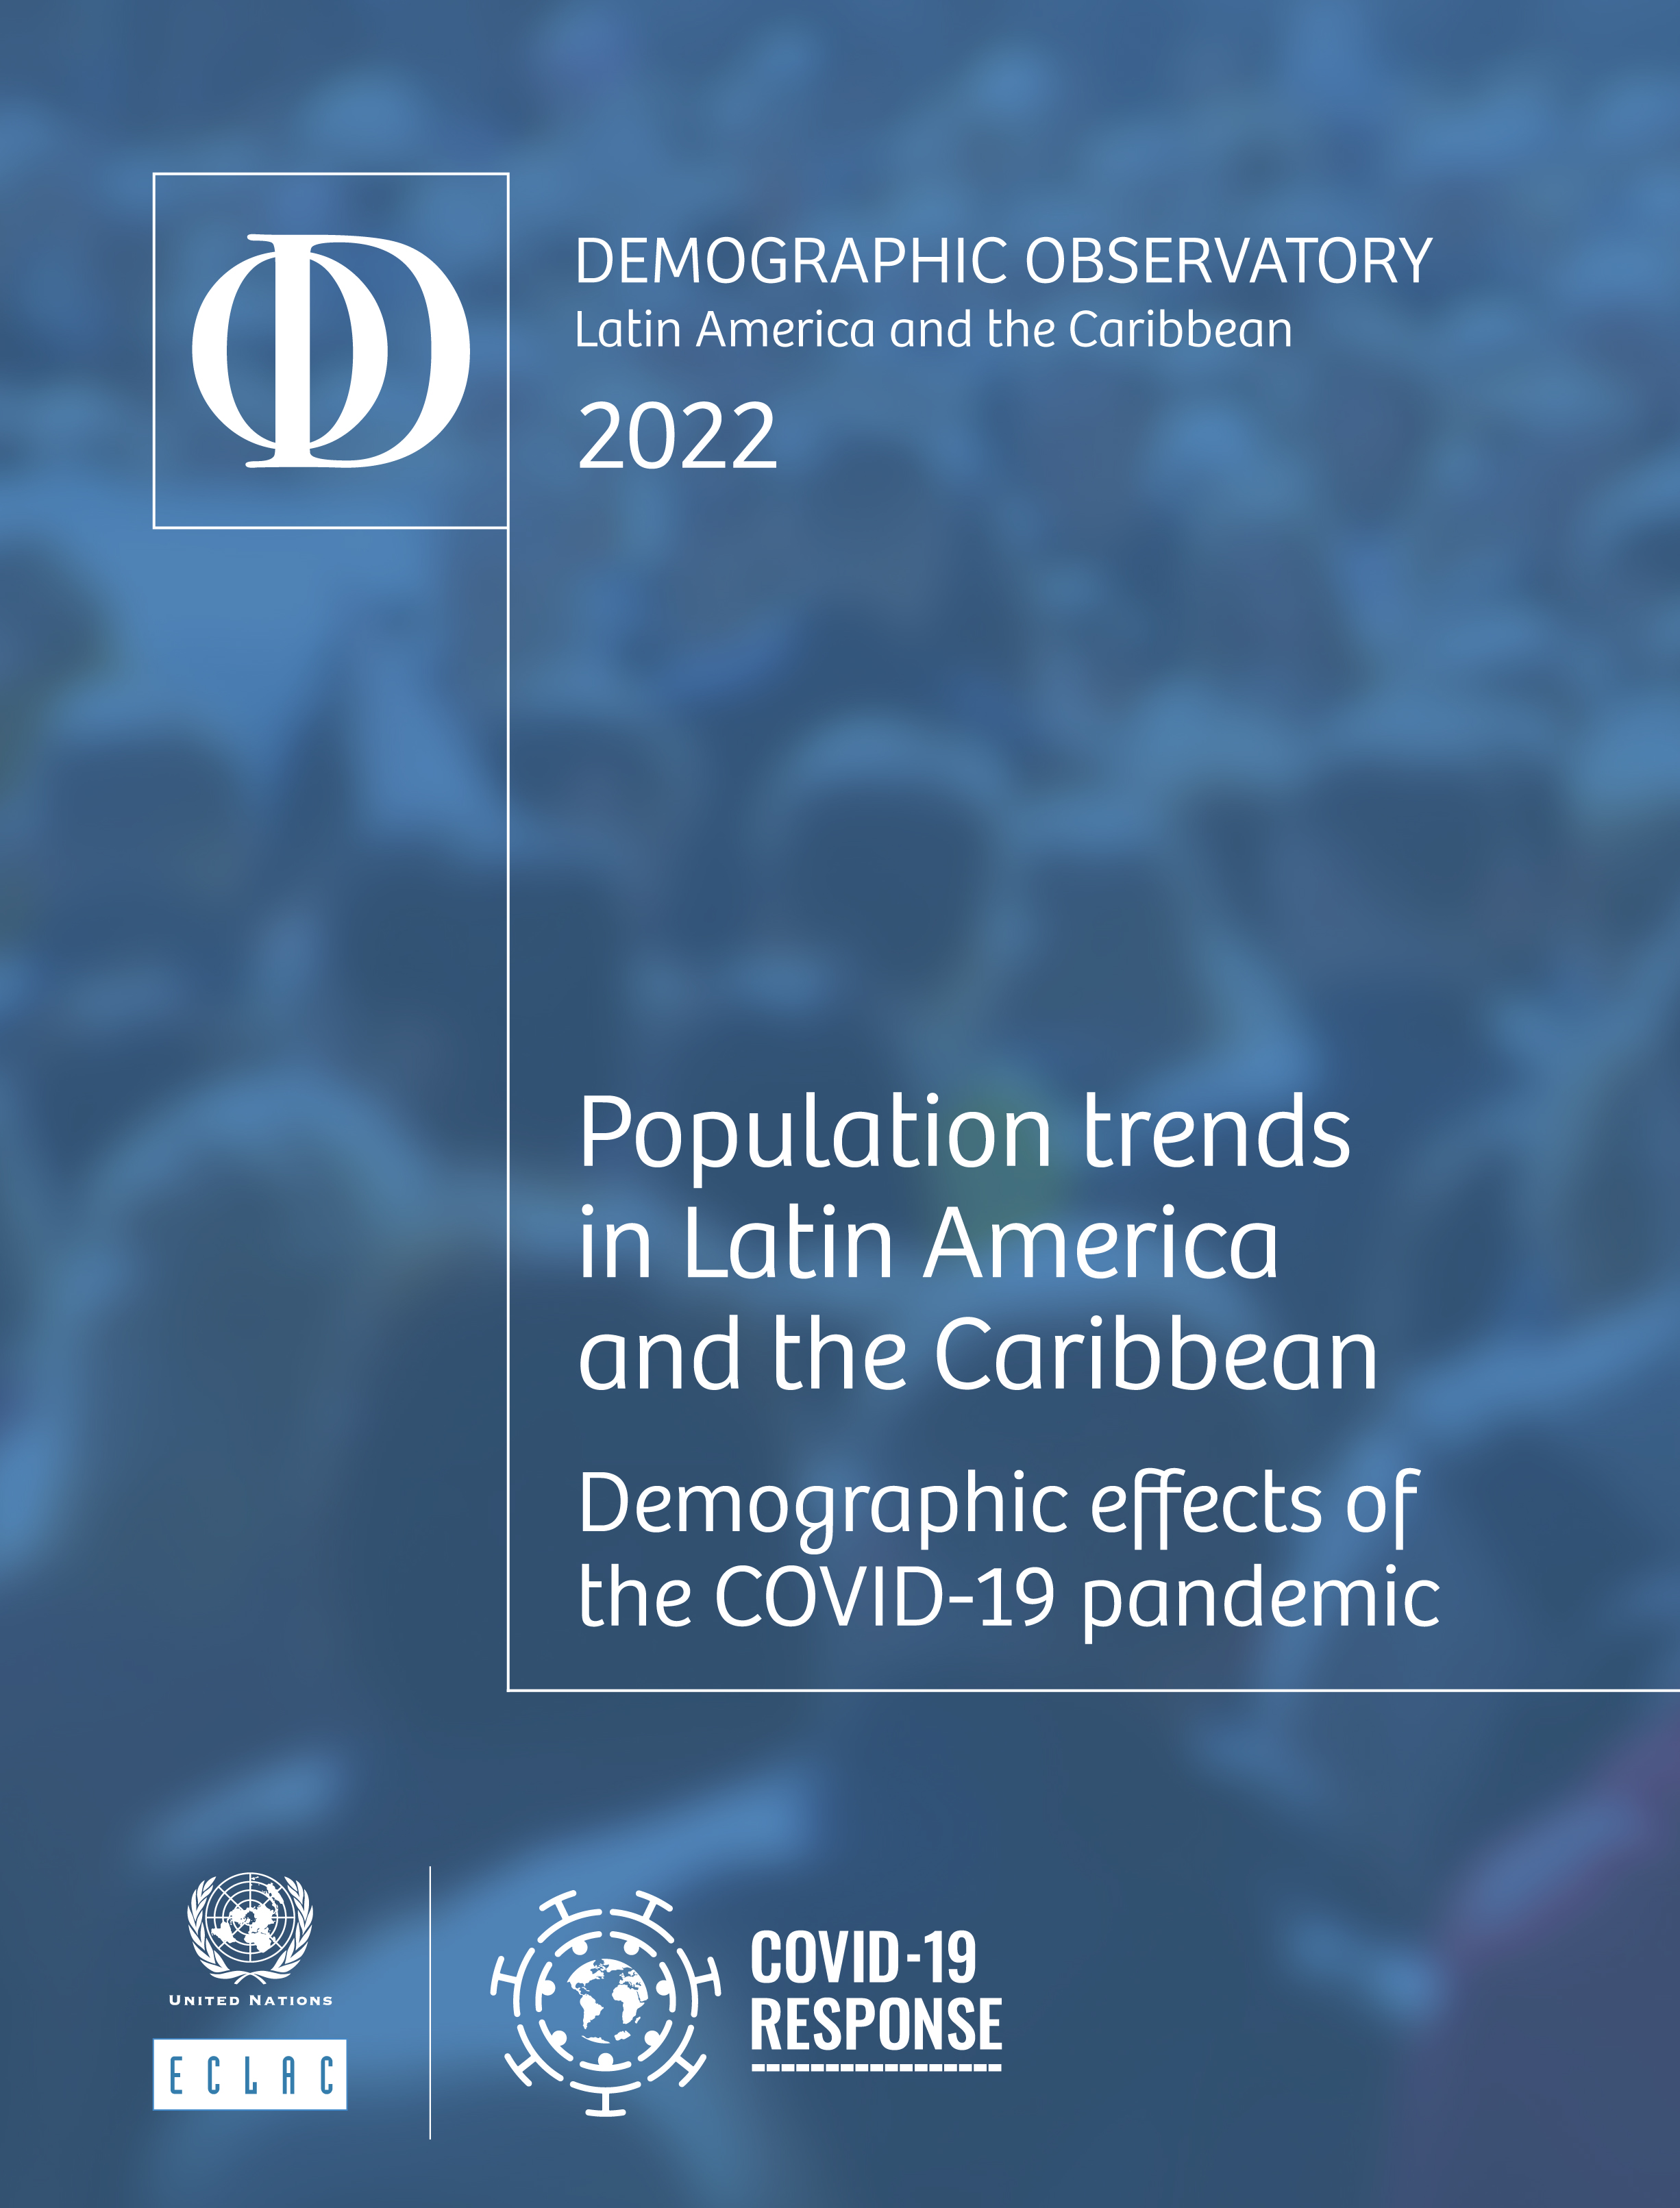 image of Latin America and the Caribbean Demographic Observatory 2022